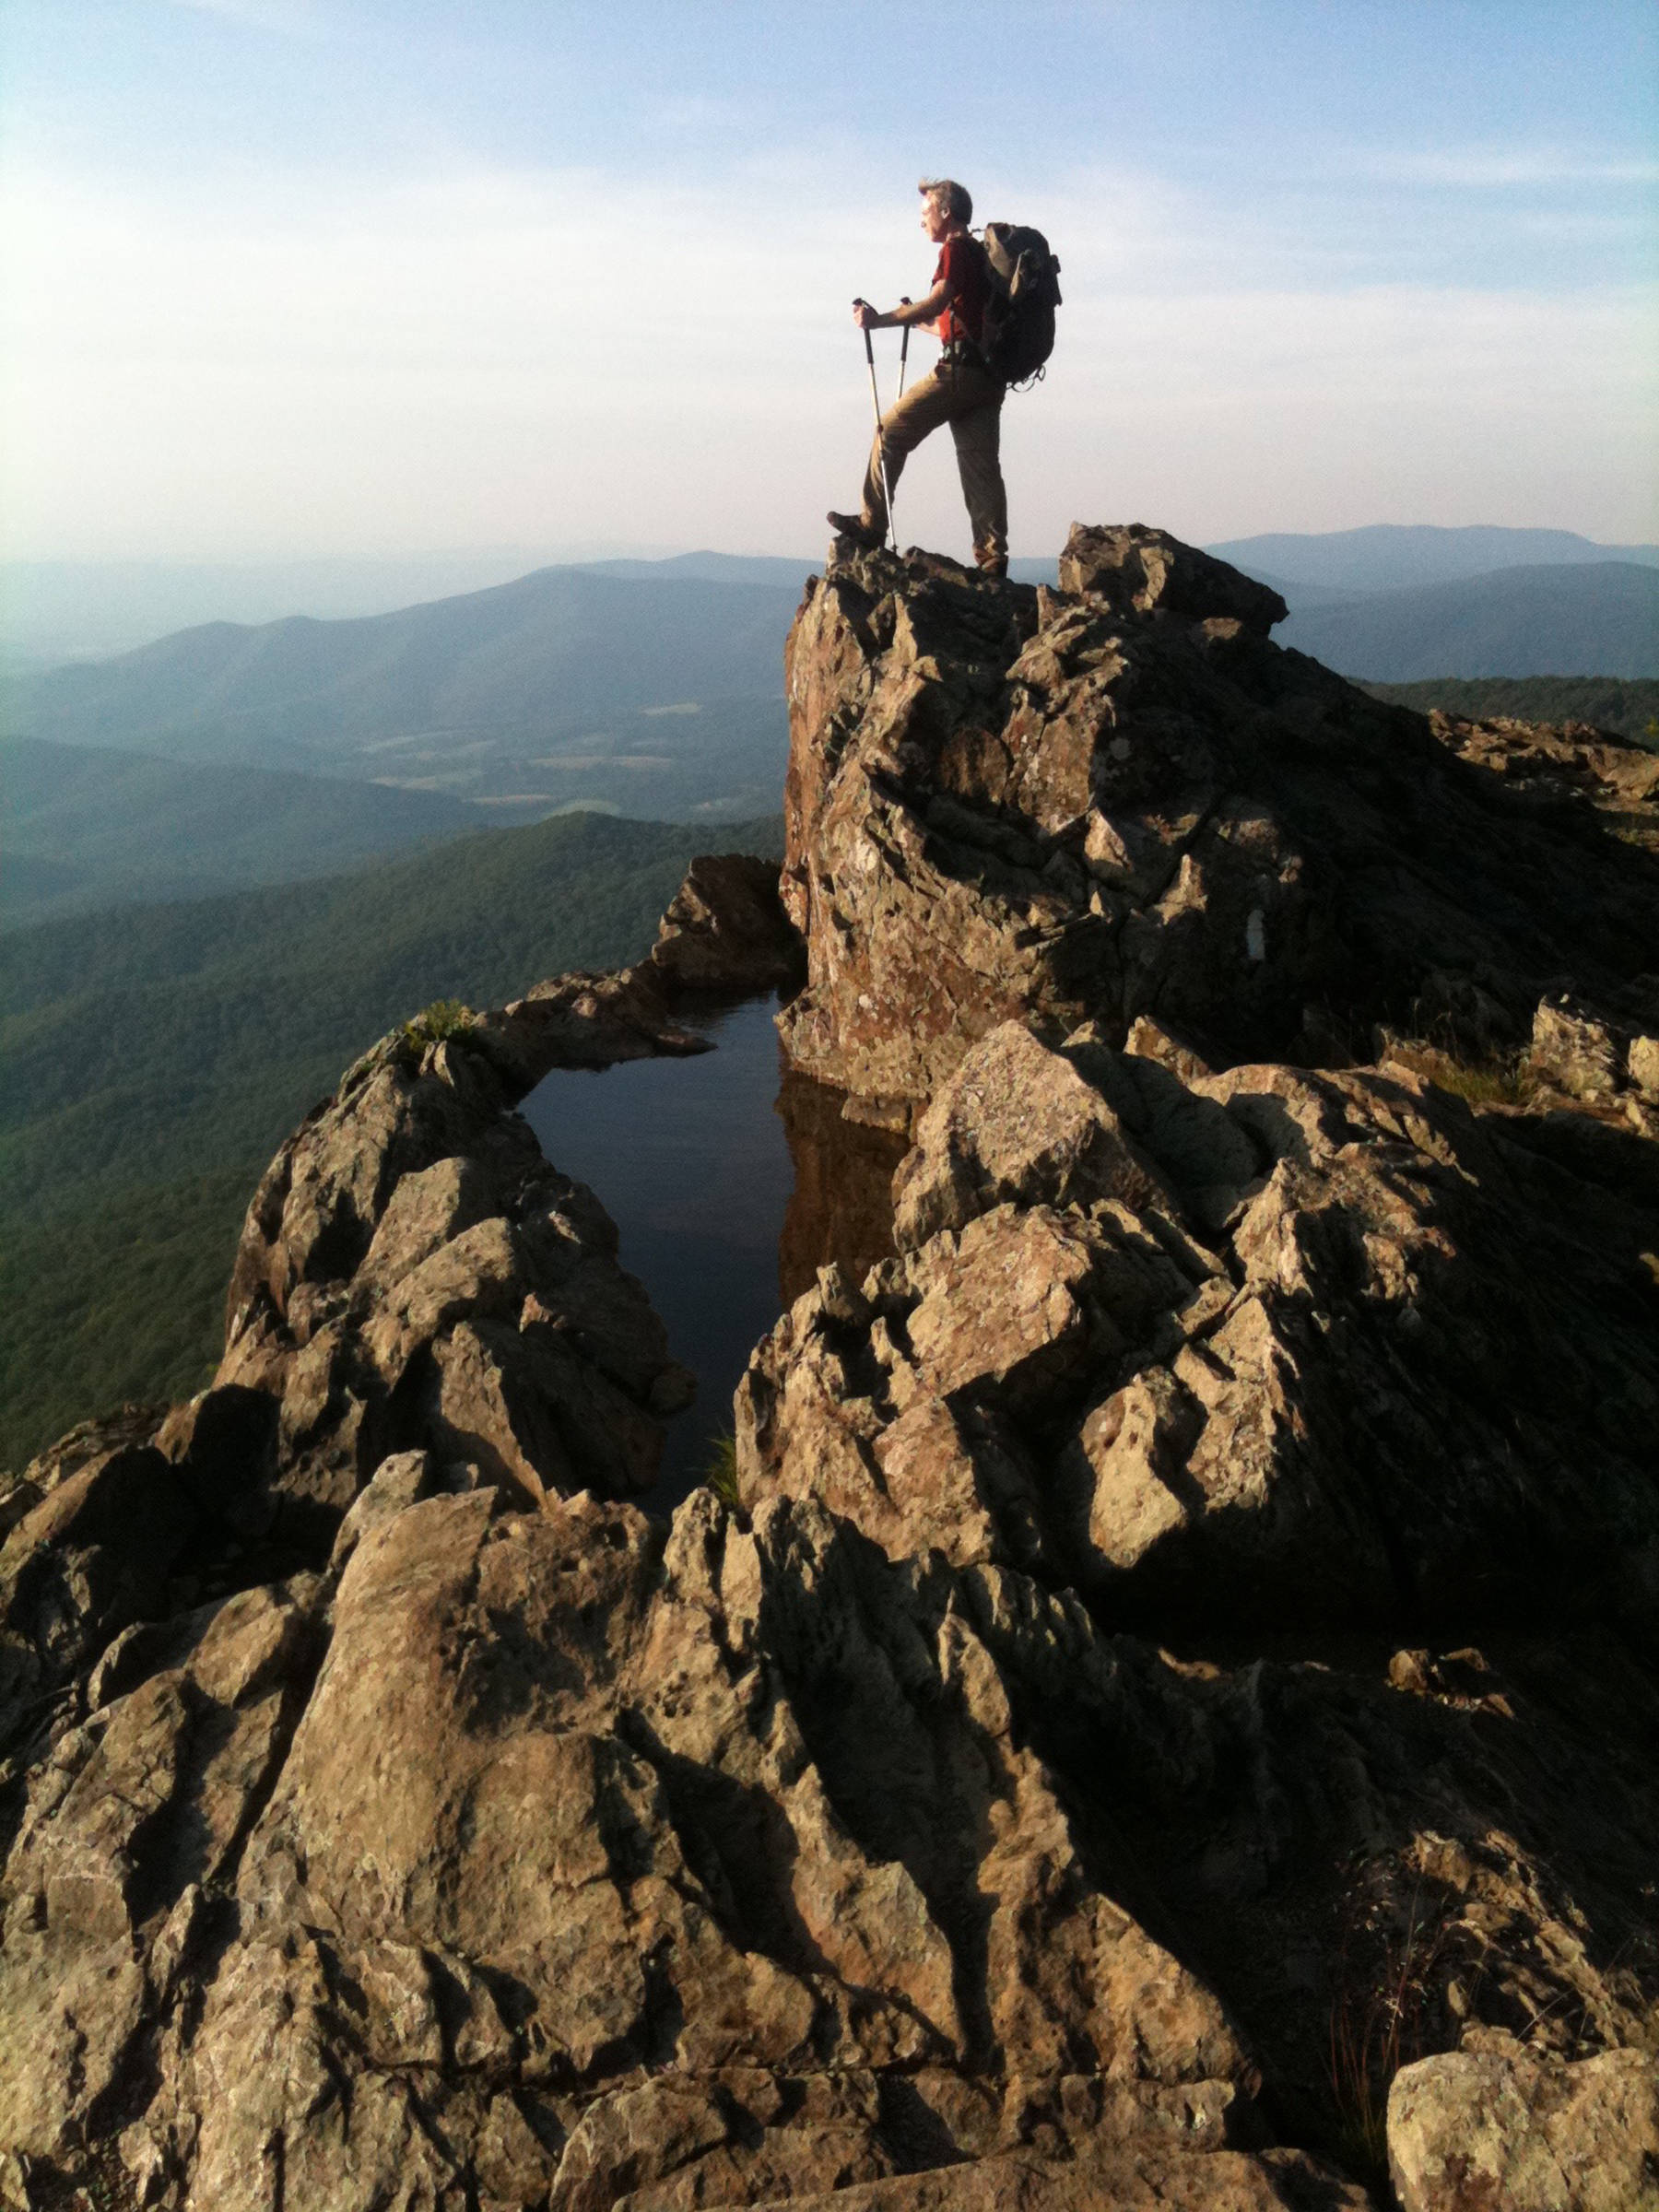 Jeff Sauer stops for a view in Shenandoah National Park in Virginia on the Appalachian Trail in 2010. (Photo courtesy Jeff Sauer)